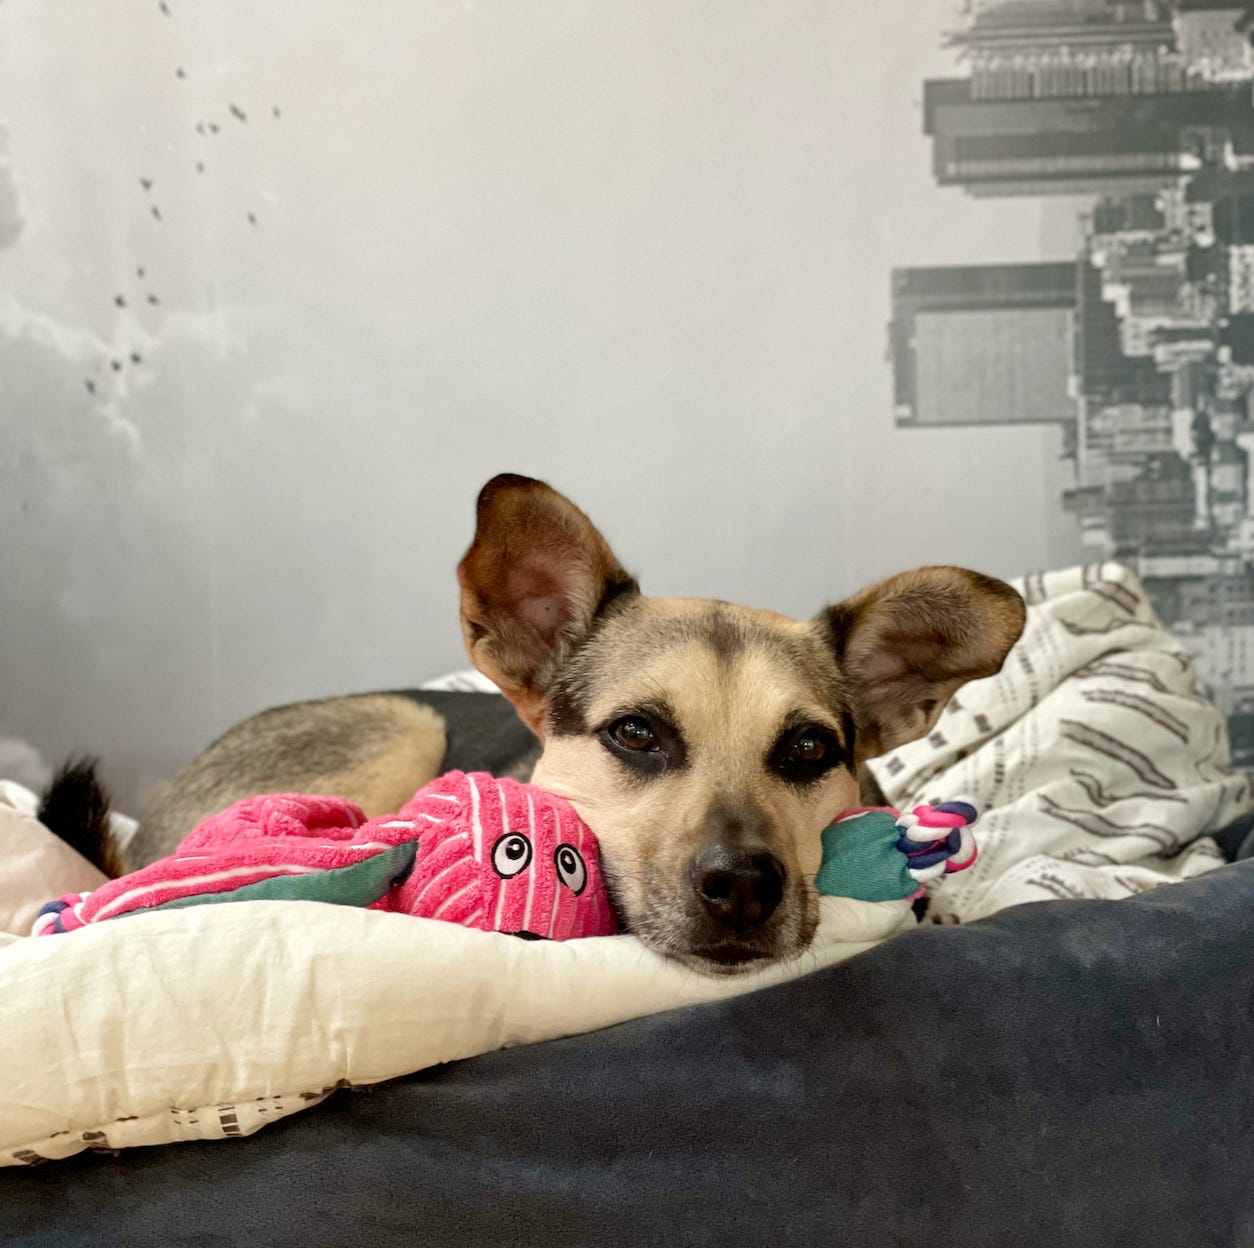 A light brown dog resting her head on a pink bunny toy in front of a black and white wallpaper background